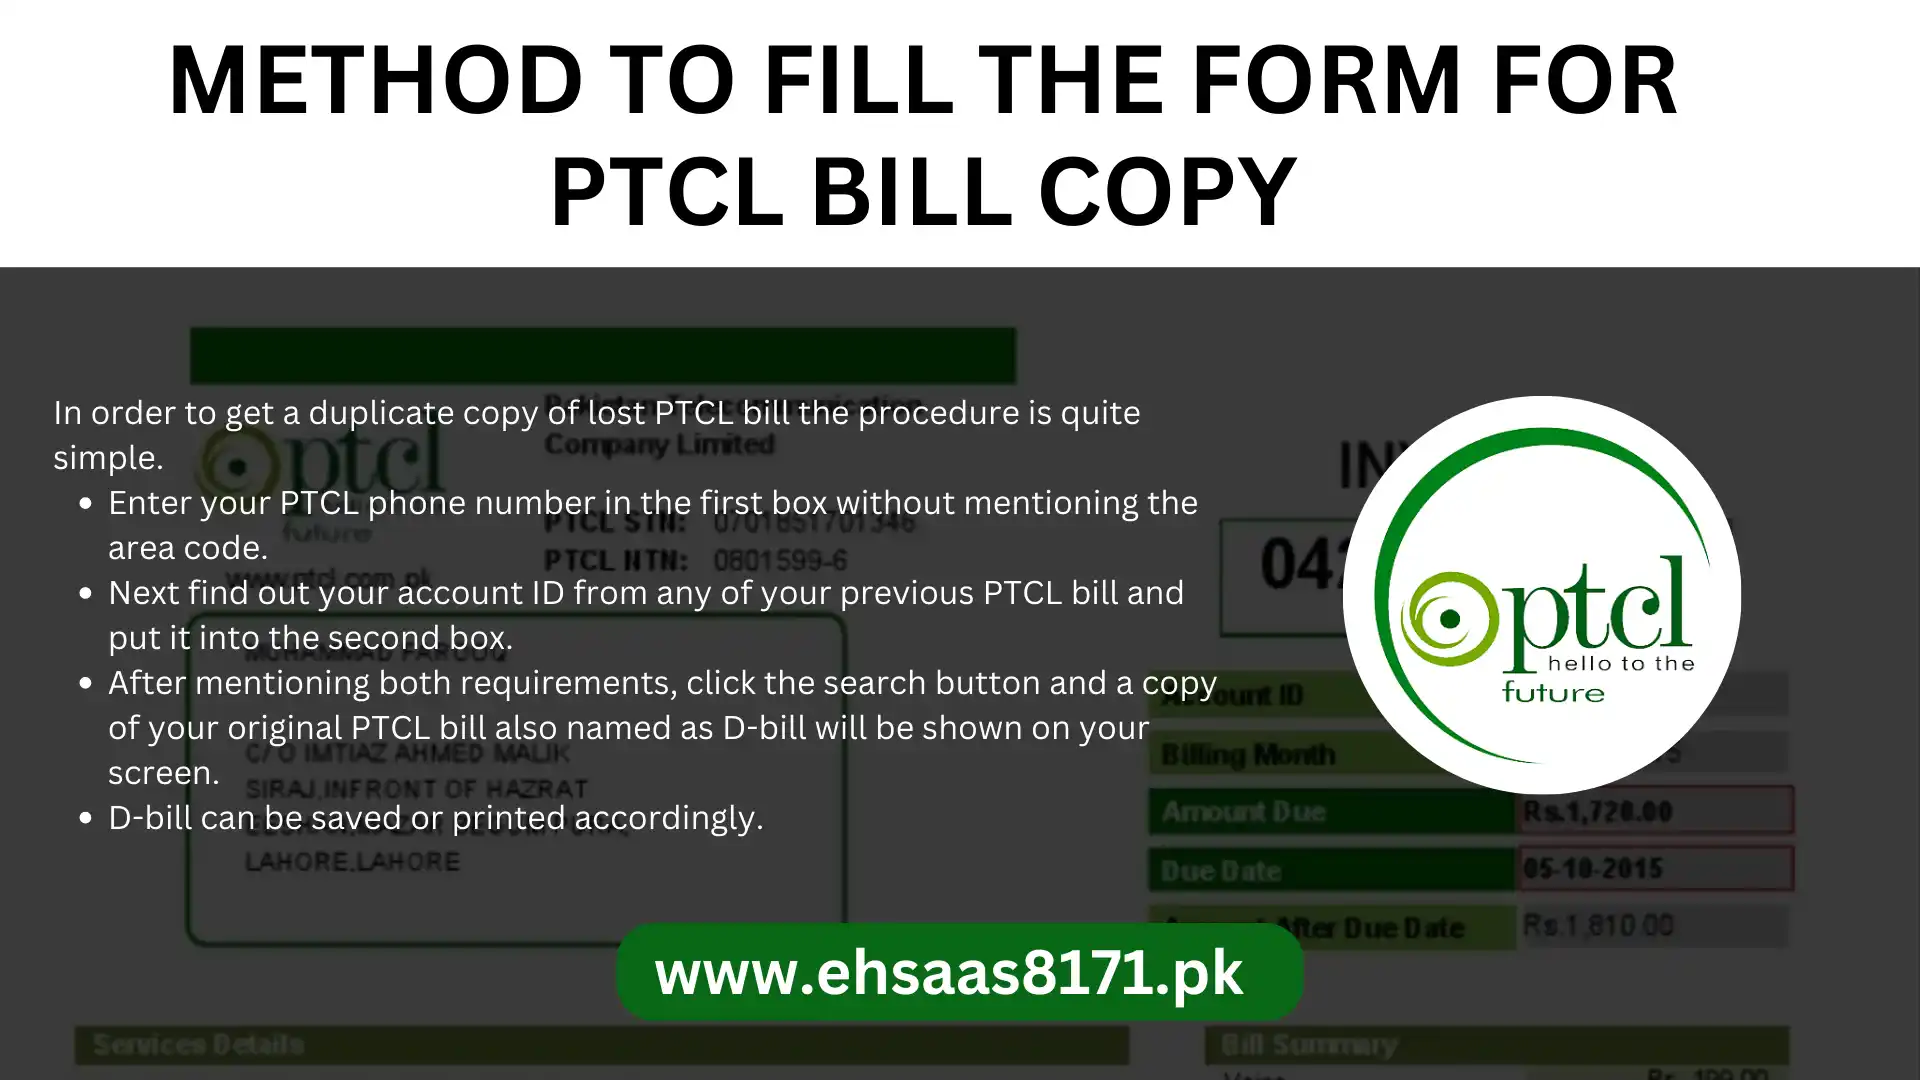 Method to fill the Form for PTCL Bill copy